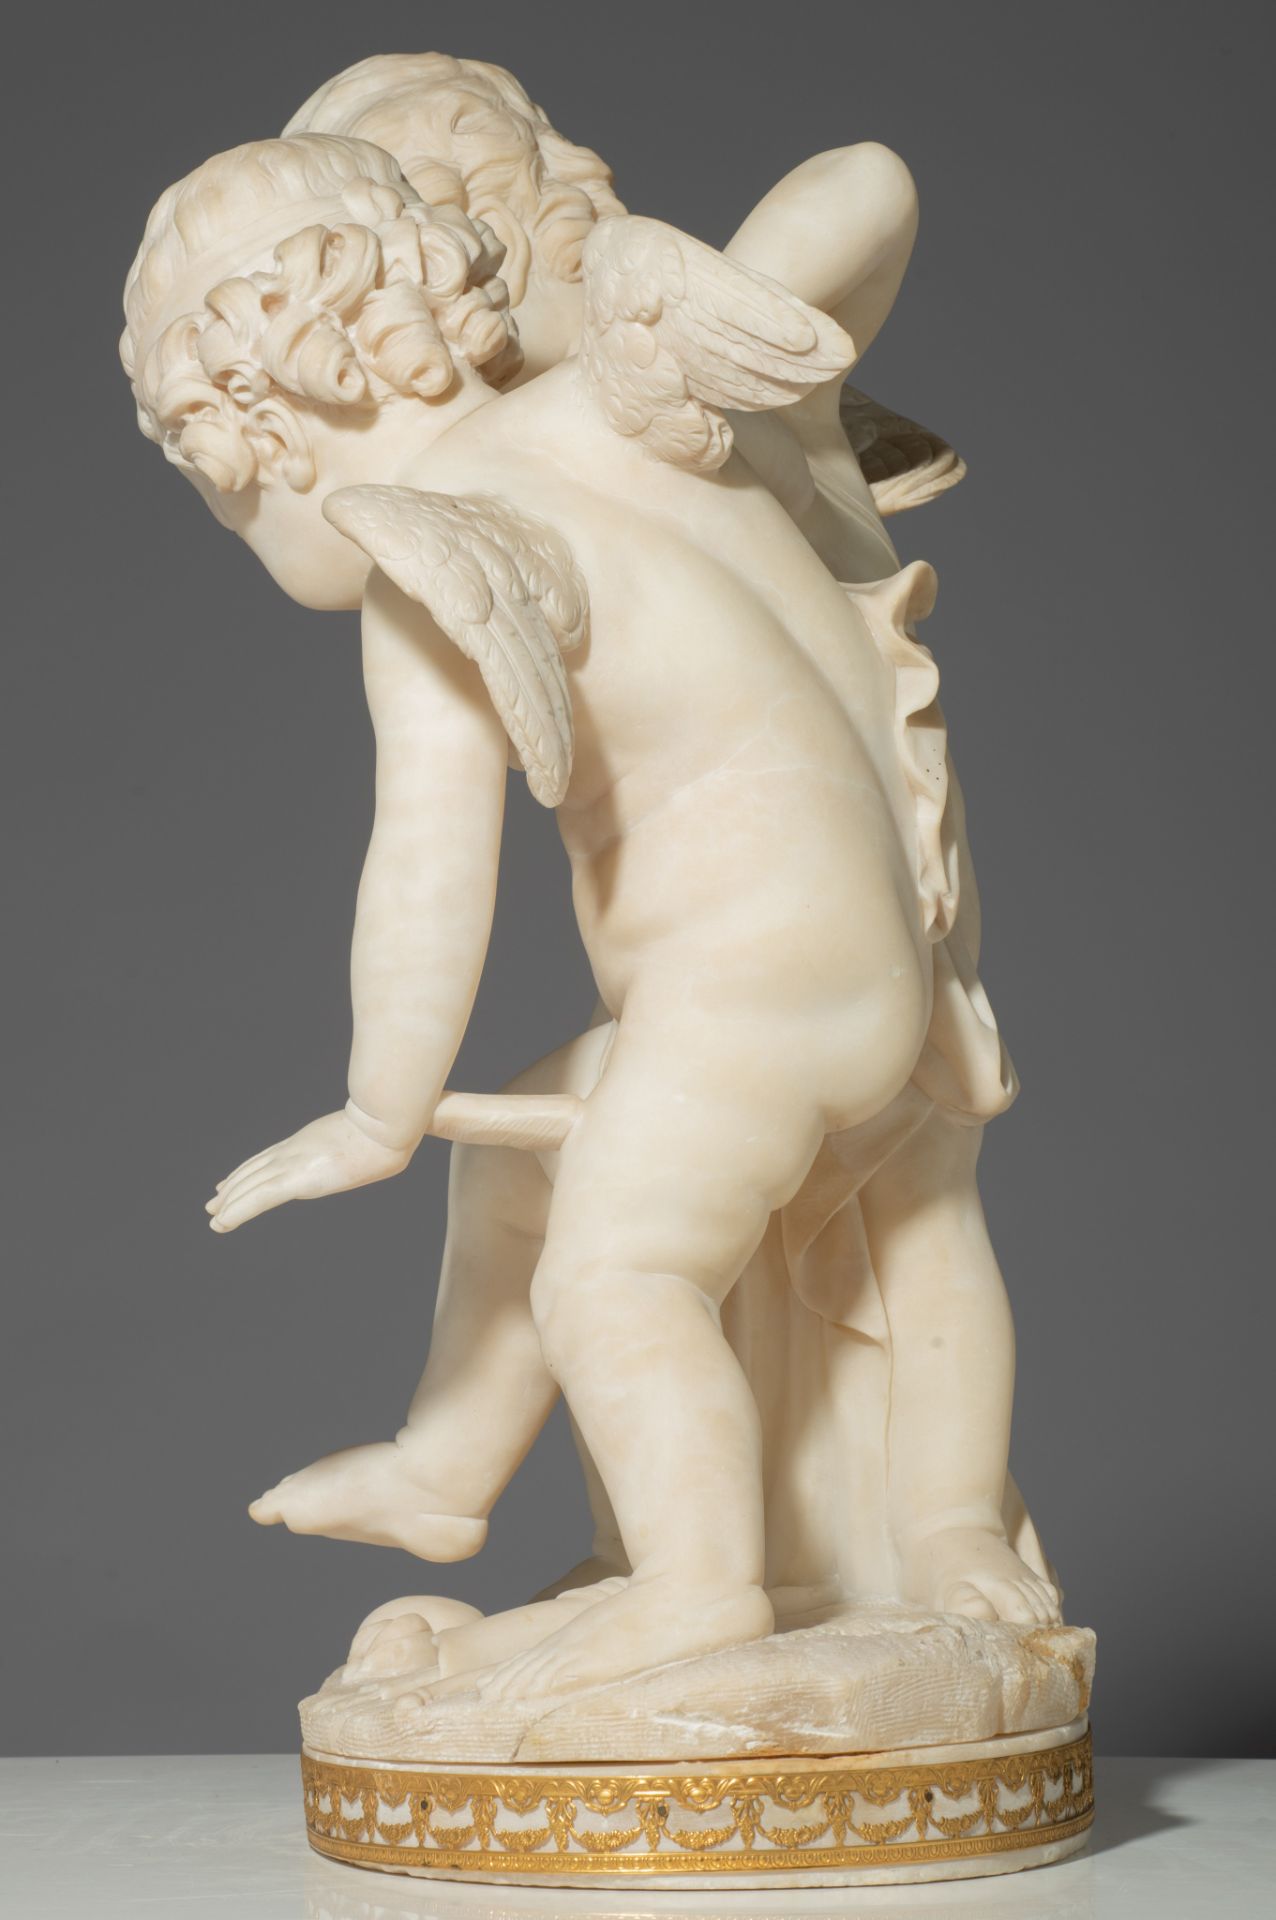 After Etienne Maurice Falconet (1716-1791), 'Bataille d'Amour', Carrara marble, H 70 - W 48 cm - Image 7 of 10